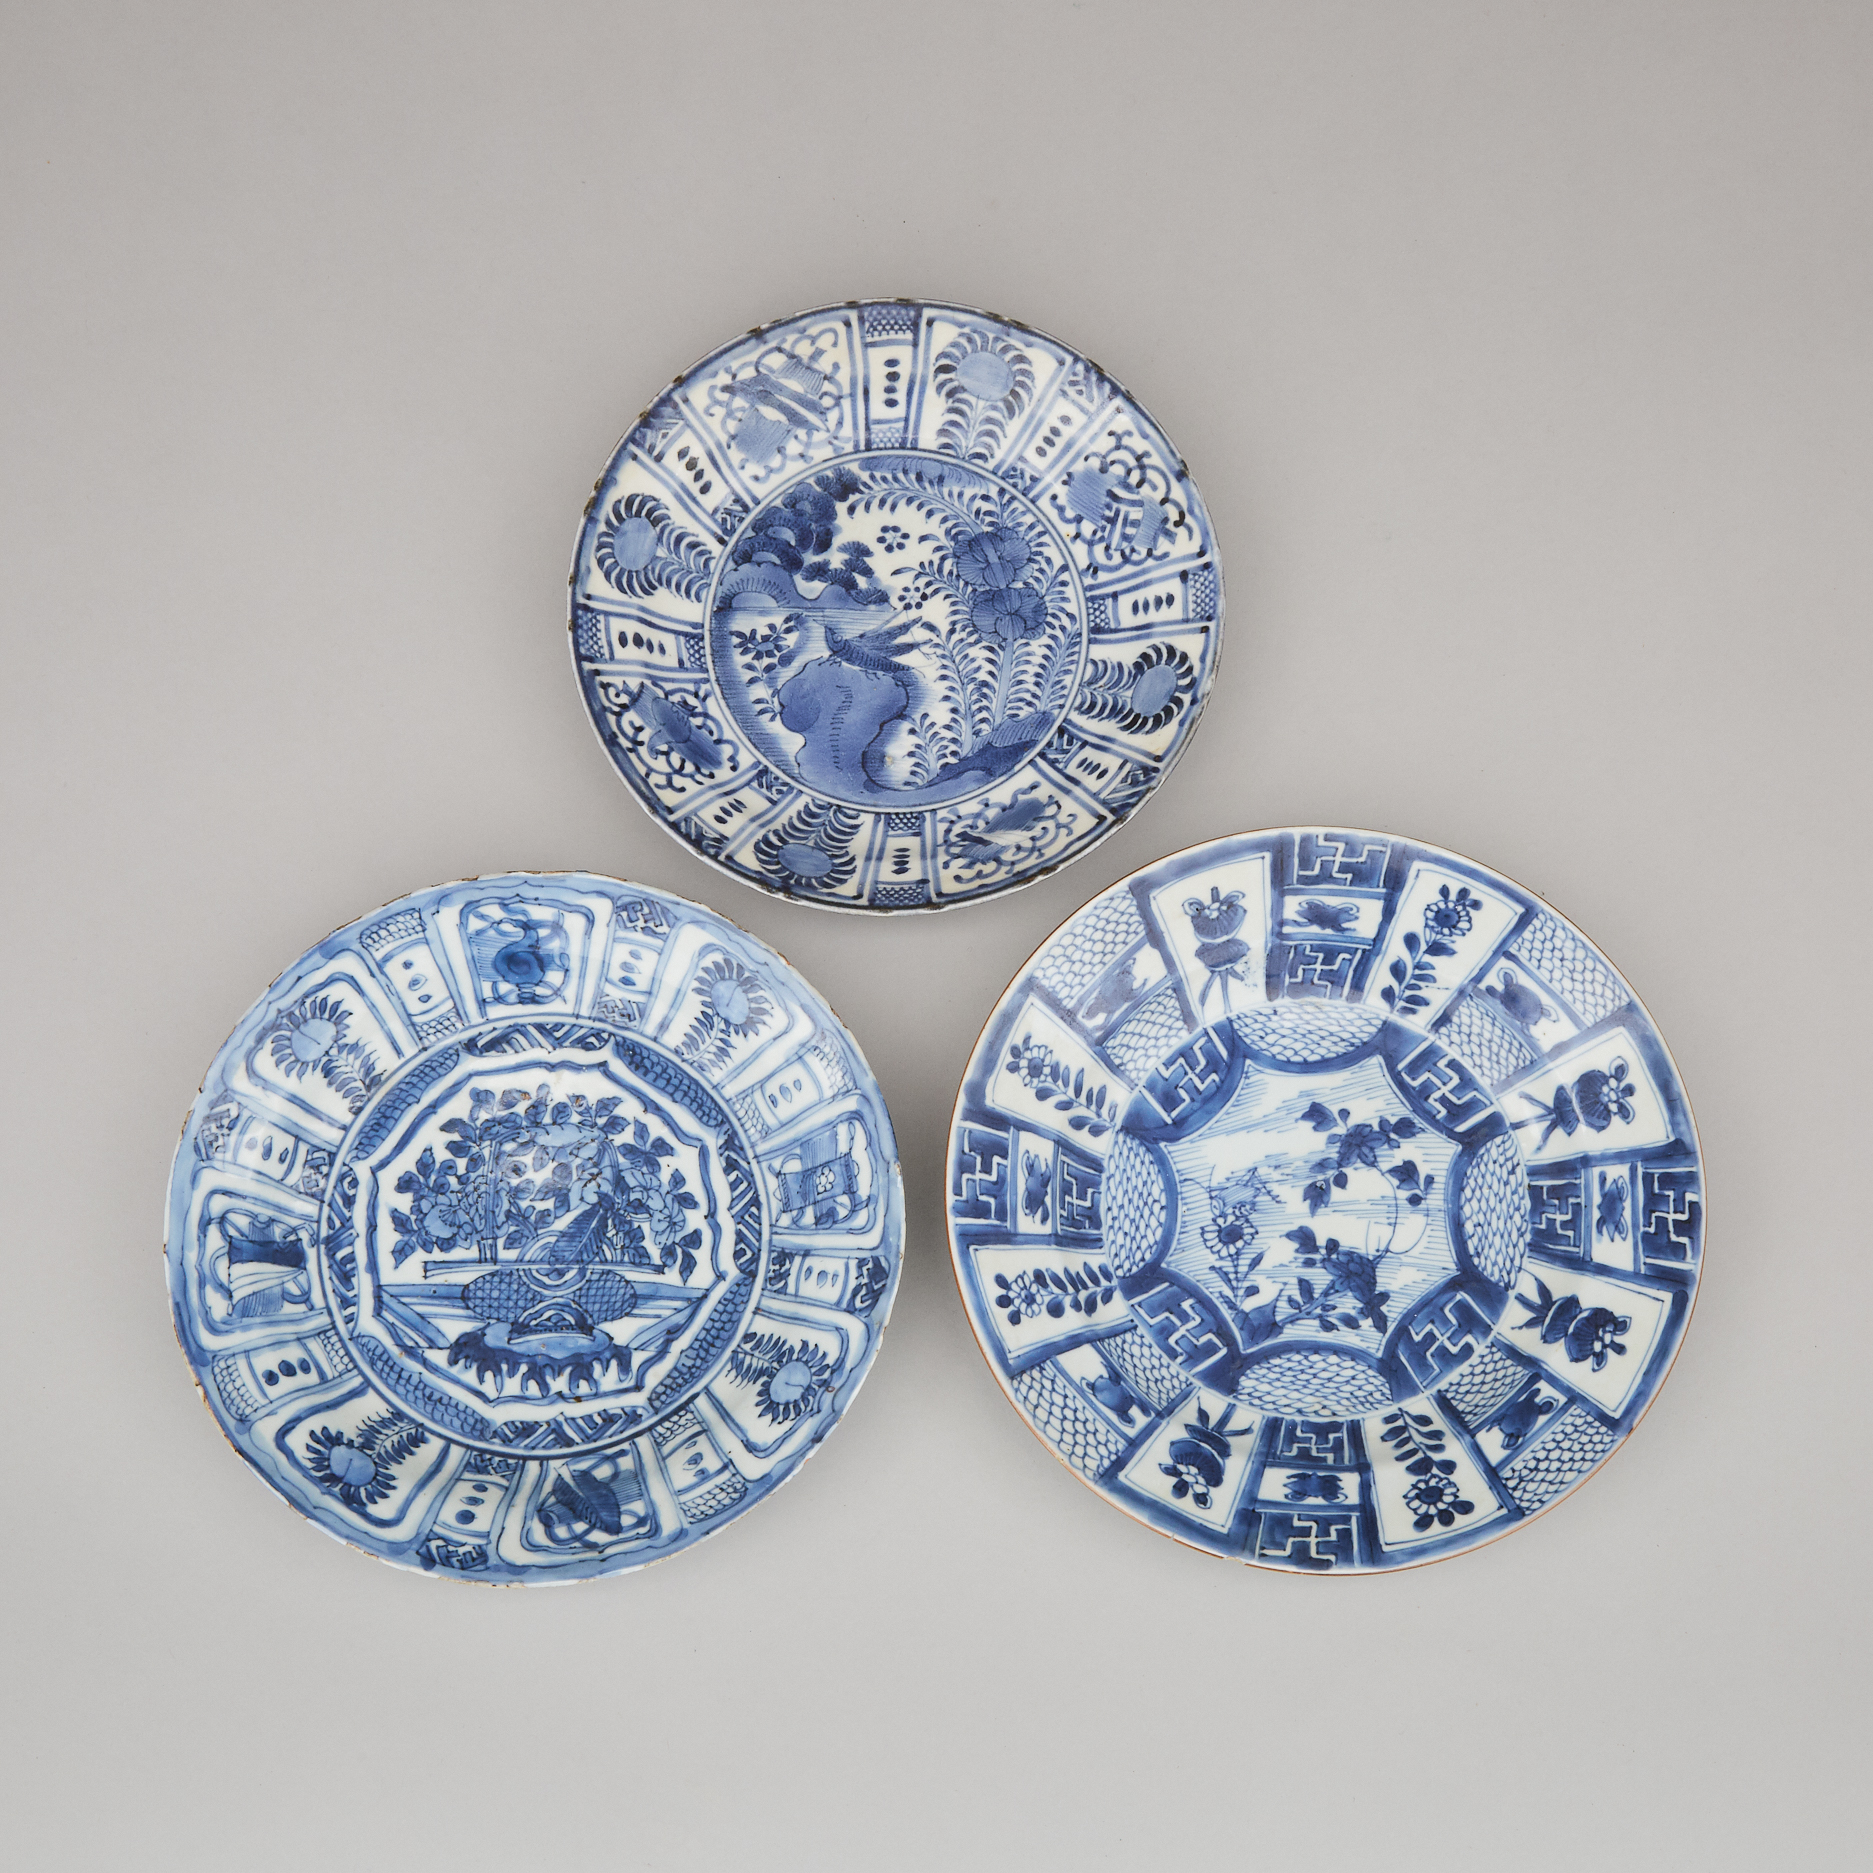 A Group of Three Blue and White Kraak Porcelain Dishes, 16th/17th Century